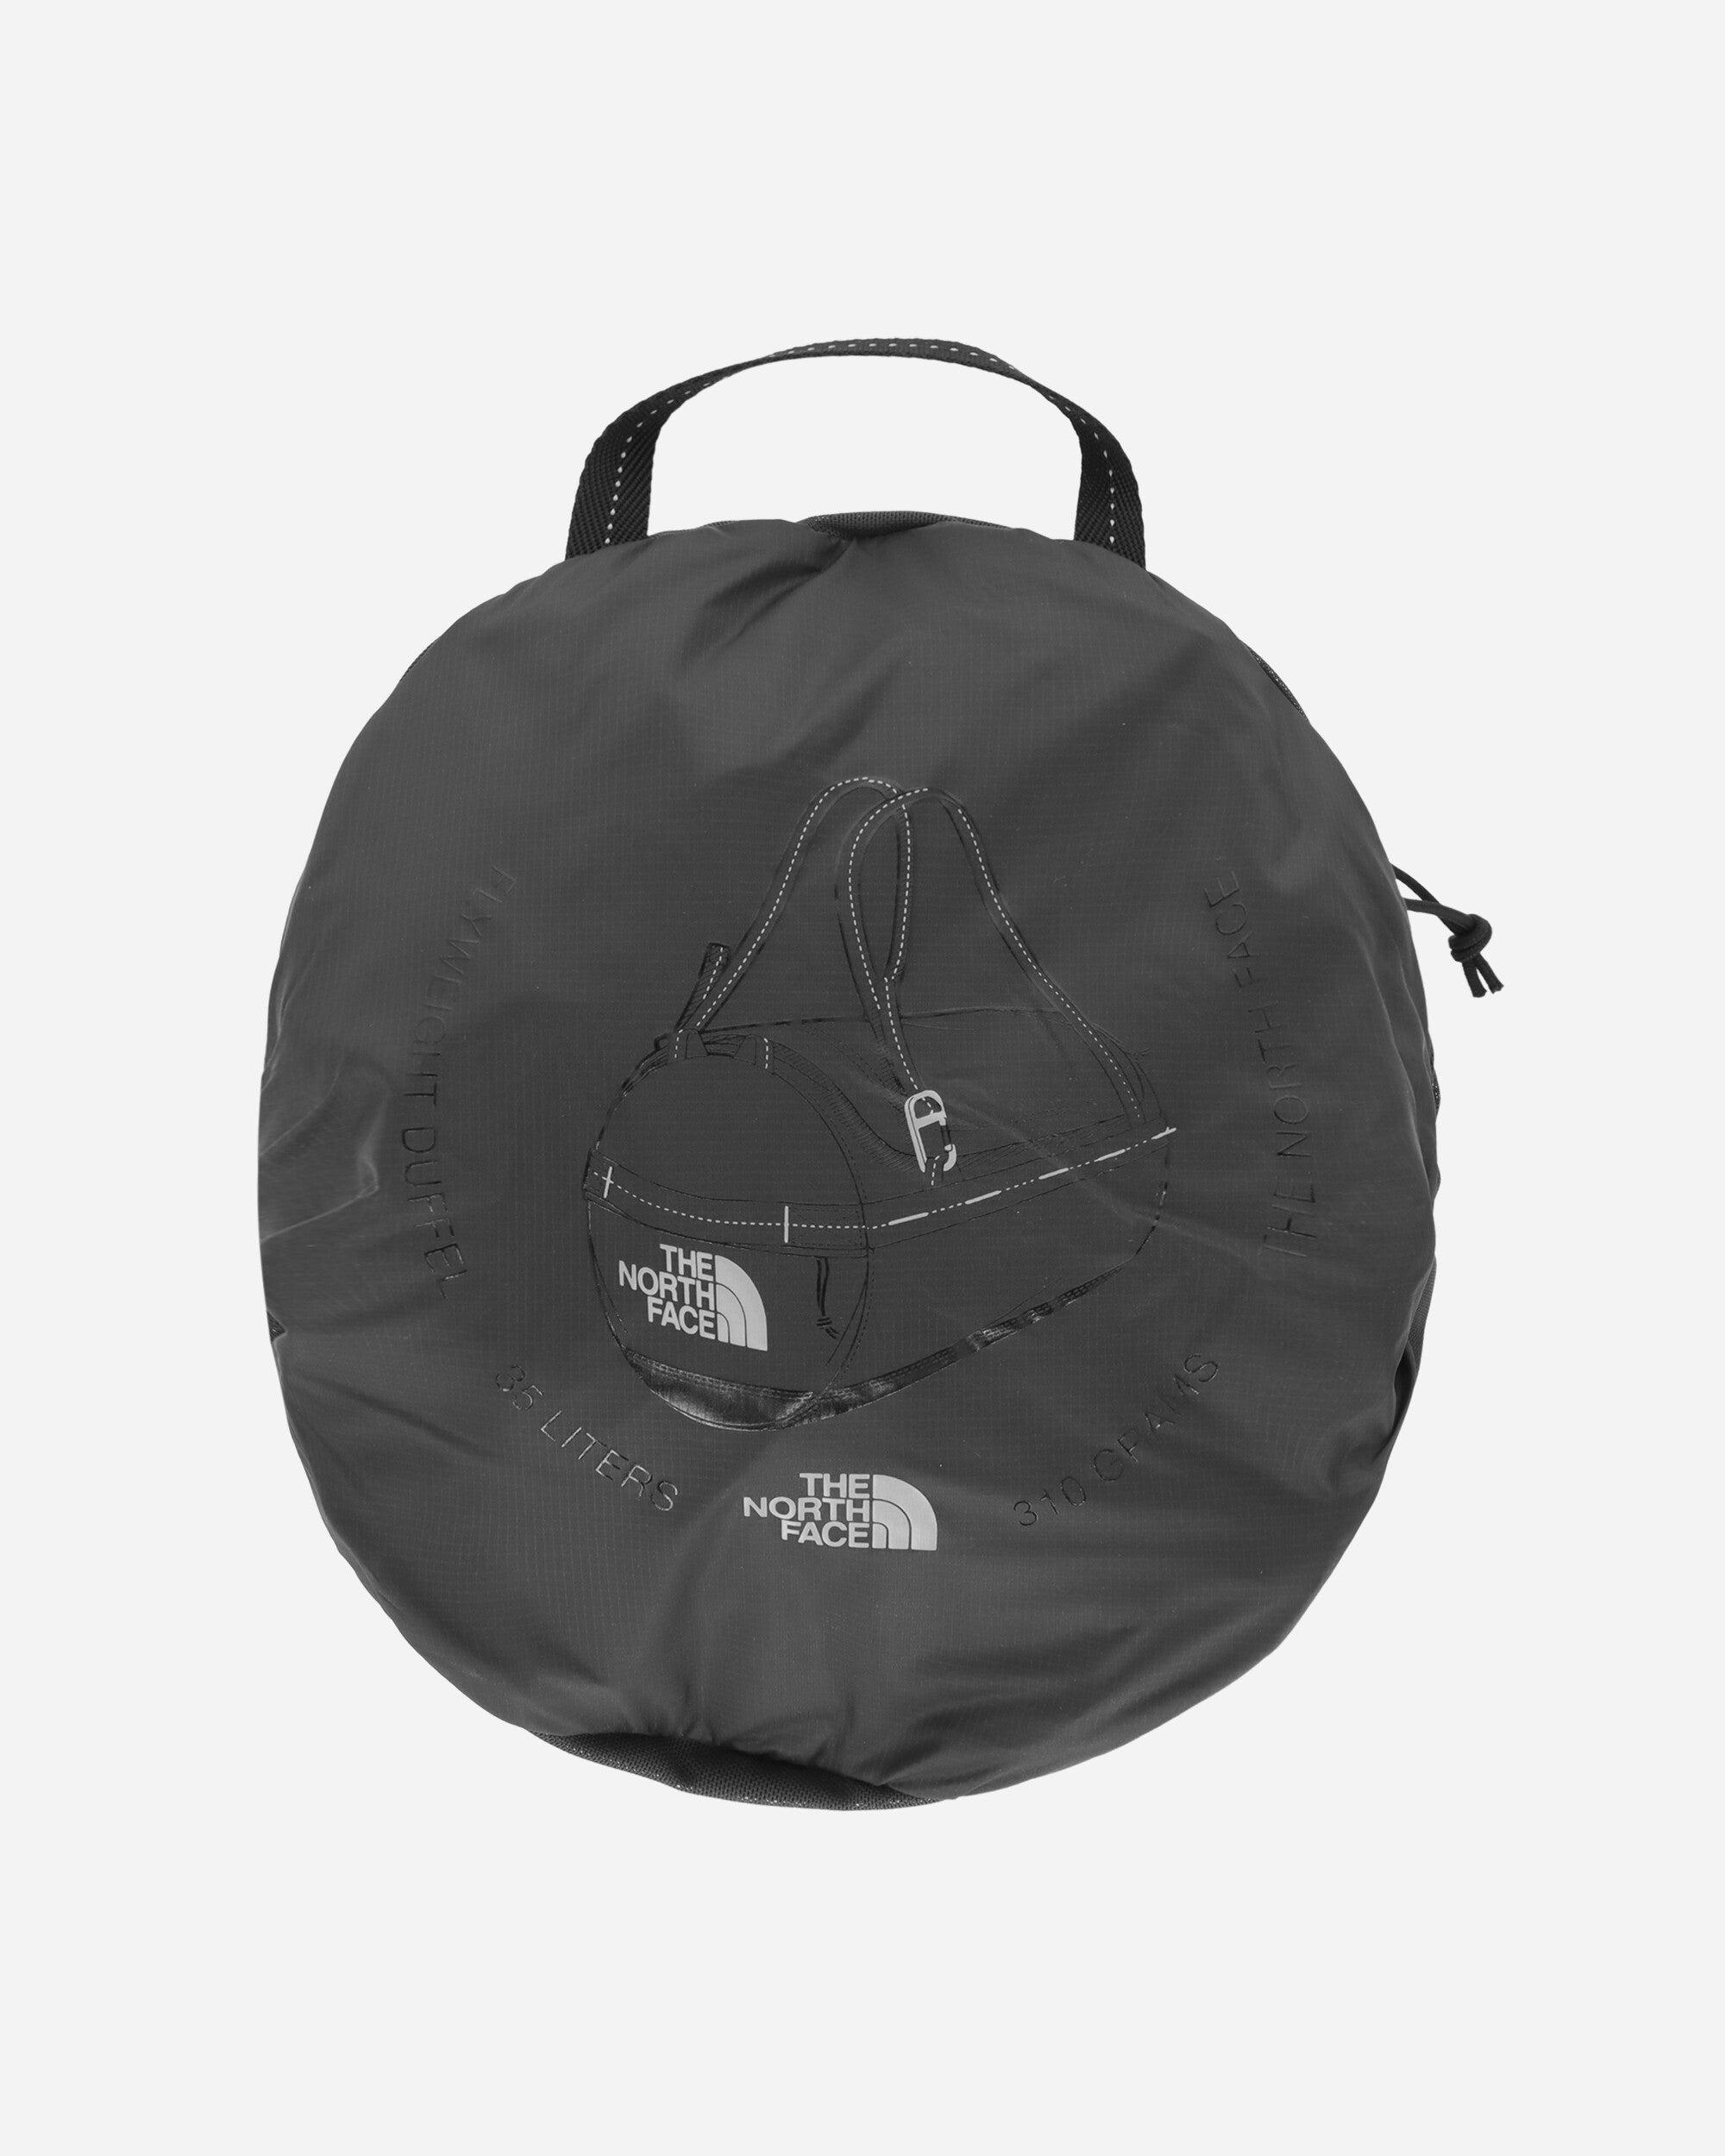 The North Face Flyweight Duffel Bag Black for Men | Lyst